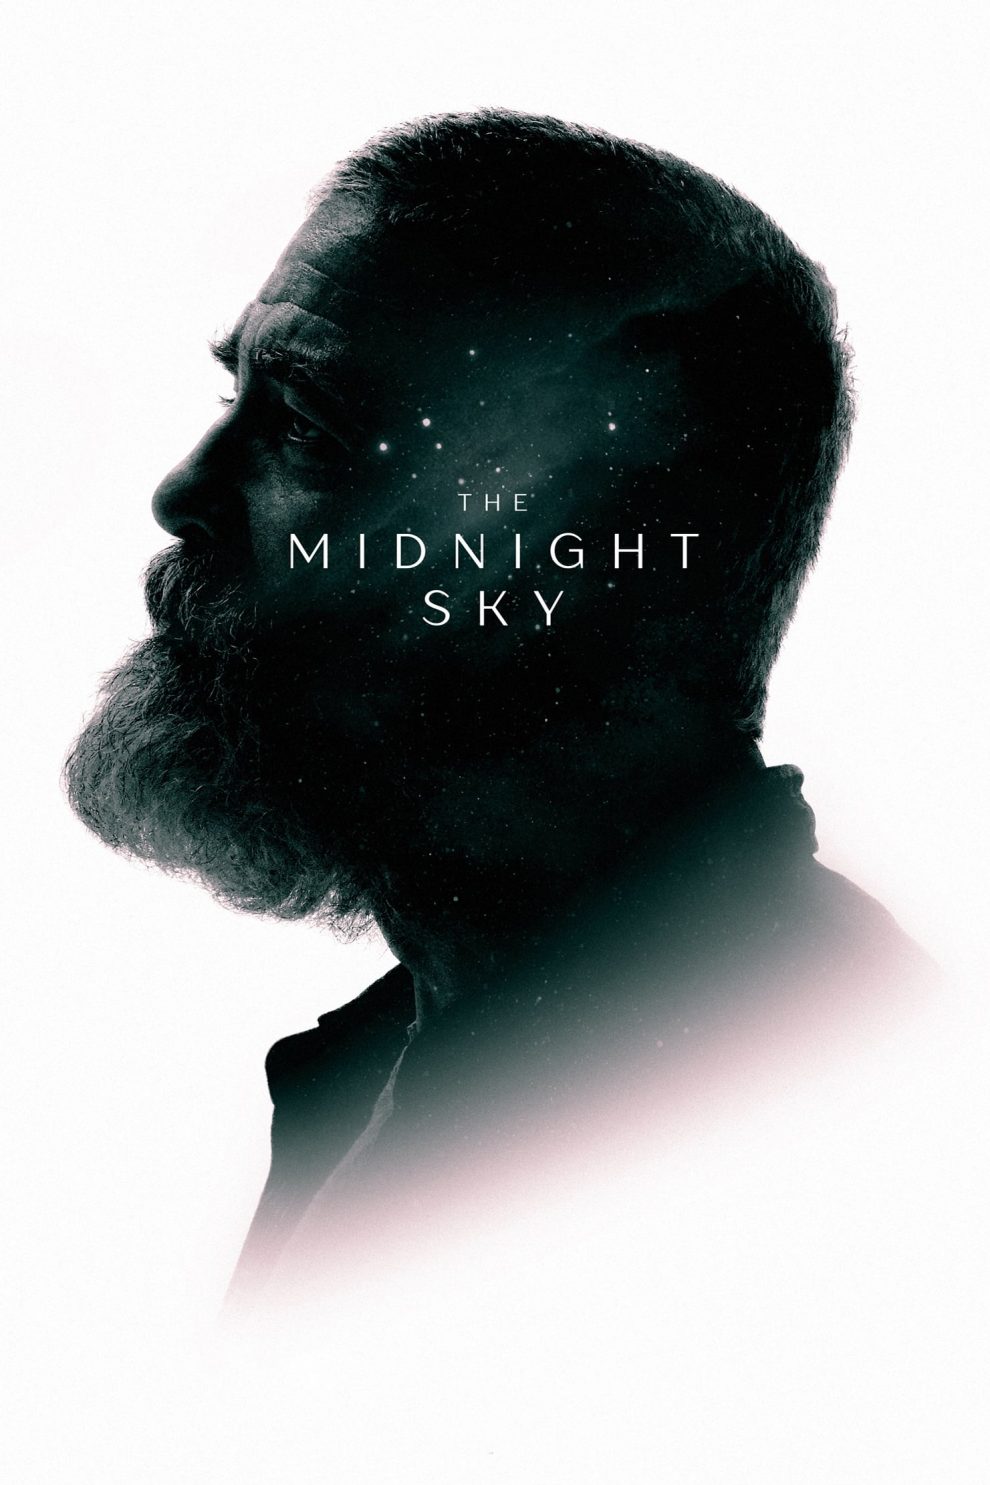 Poster for the movie "The Midnight Sky"